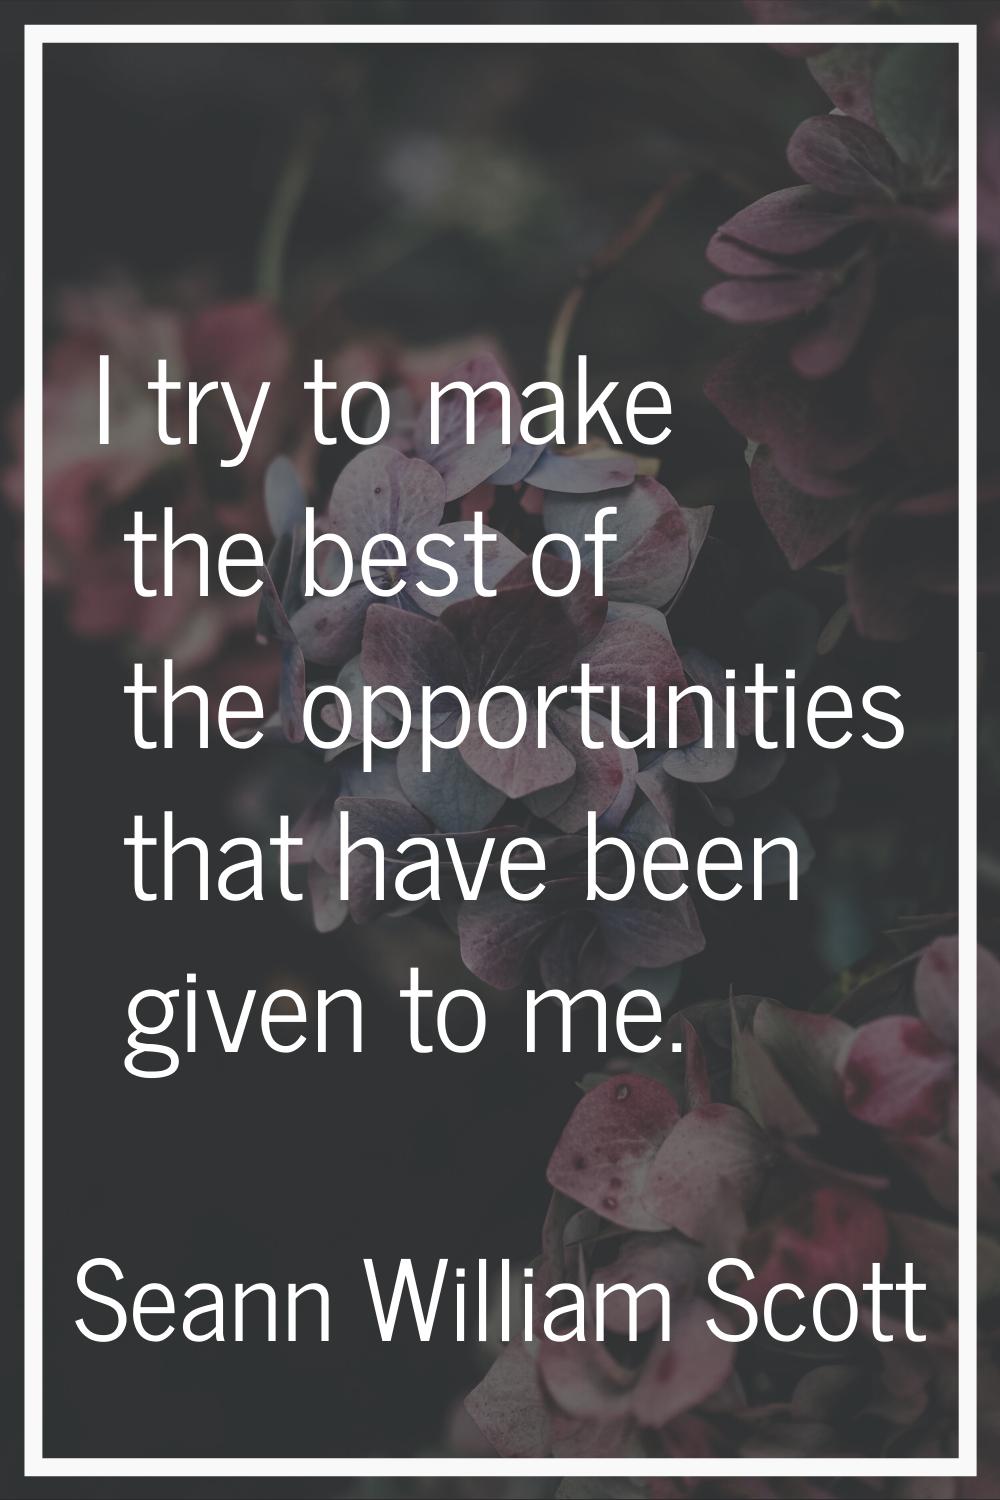 I try to make the best of the opportunities that have been given to me.